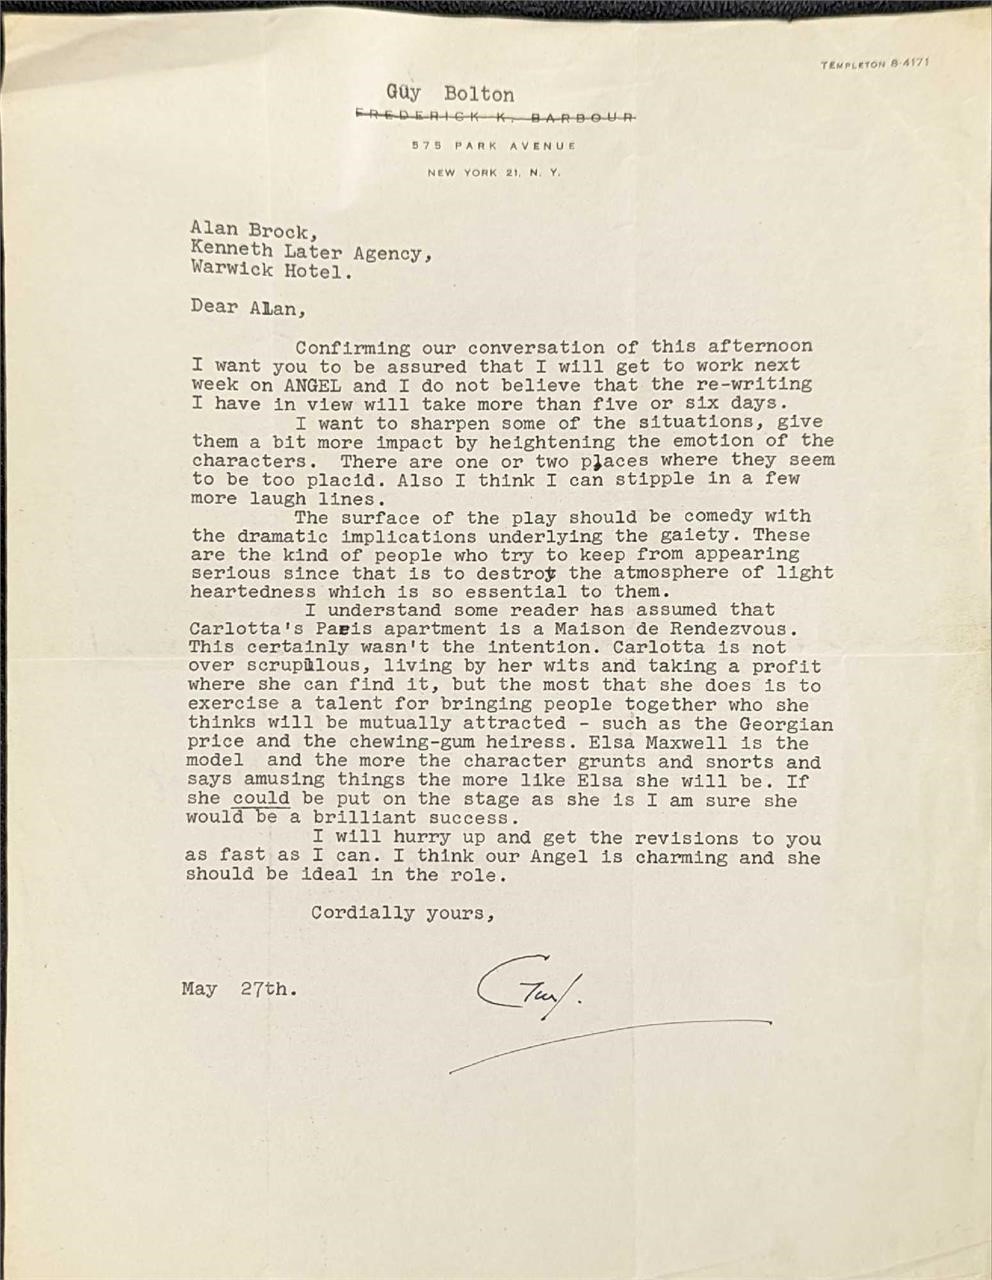 Signed Guy Bolton Playwright Letter